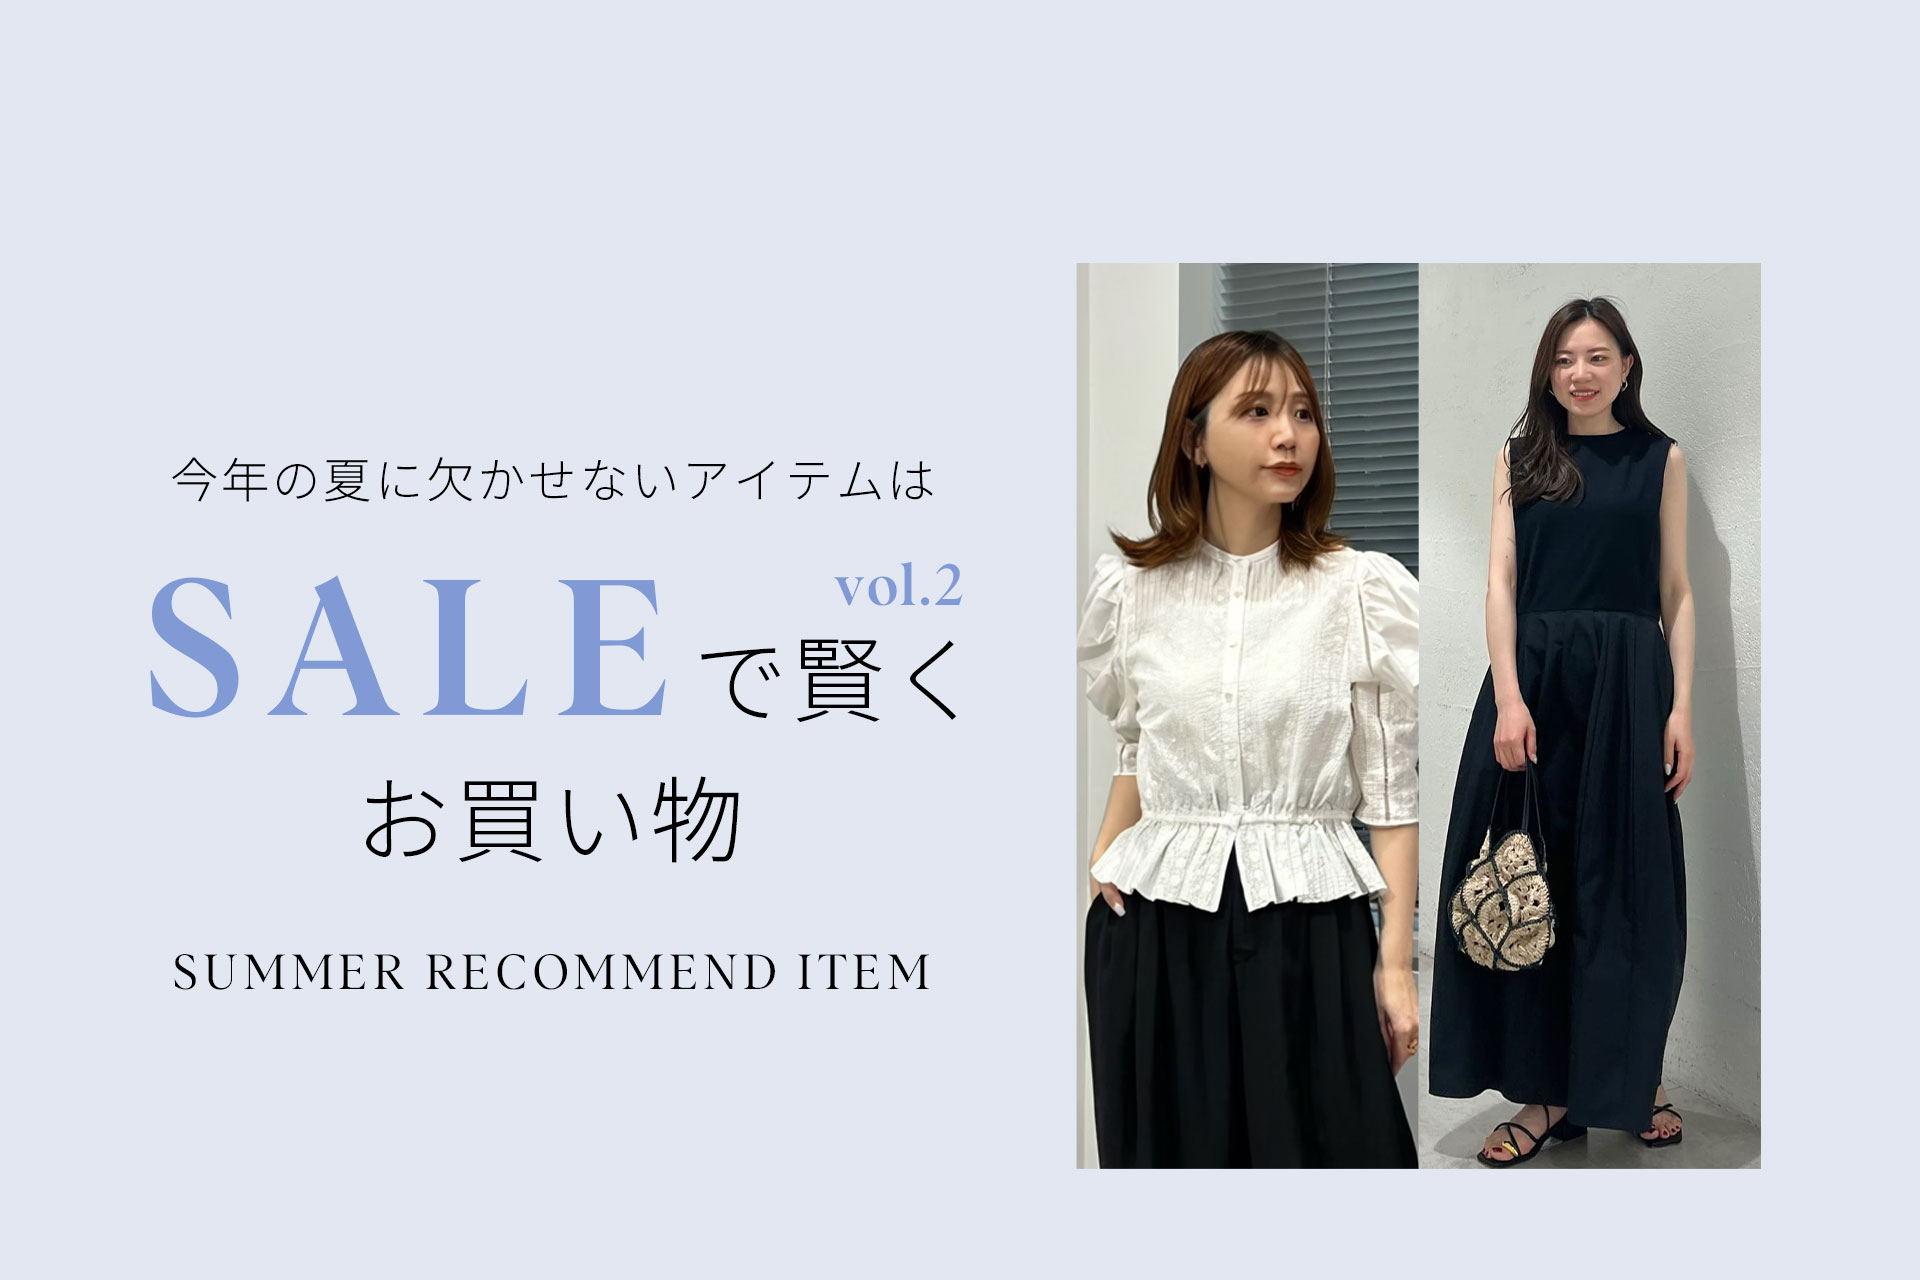 SUMMER RECOMMED ITEM vol.1 SALEで賢くお買い物